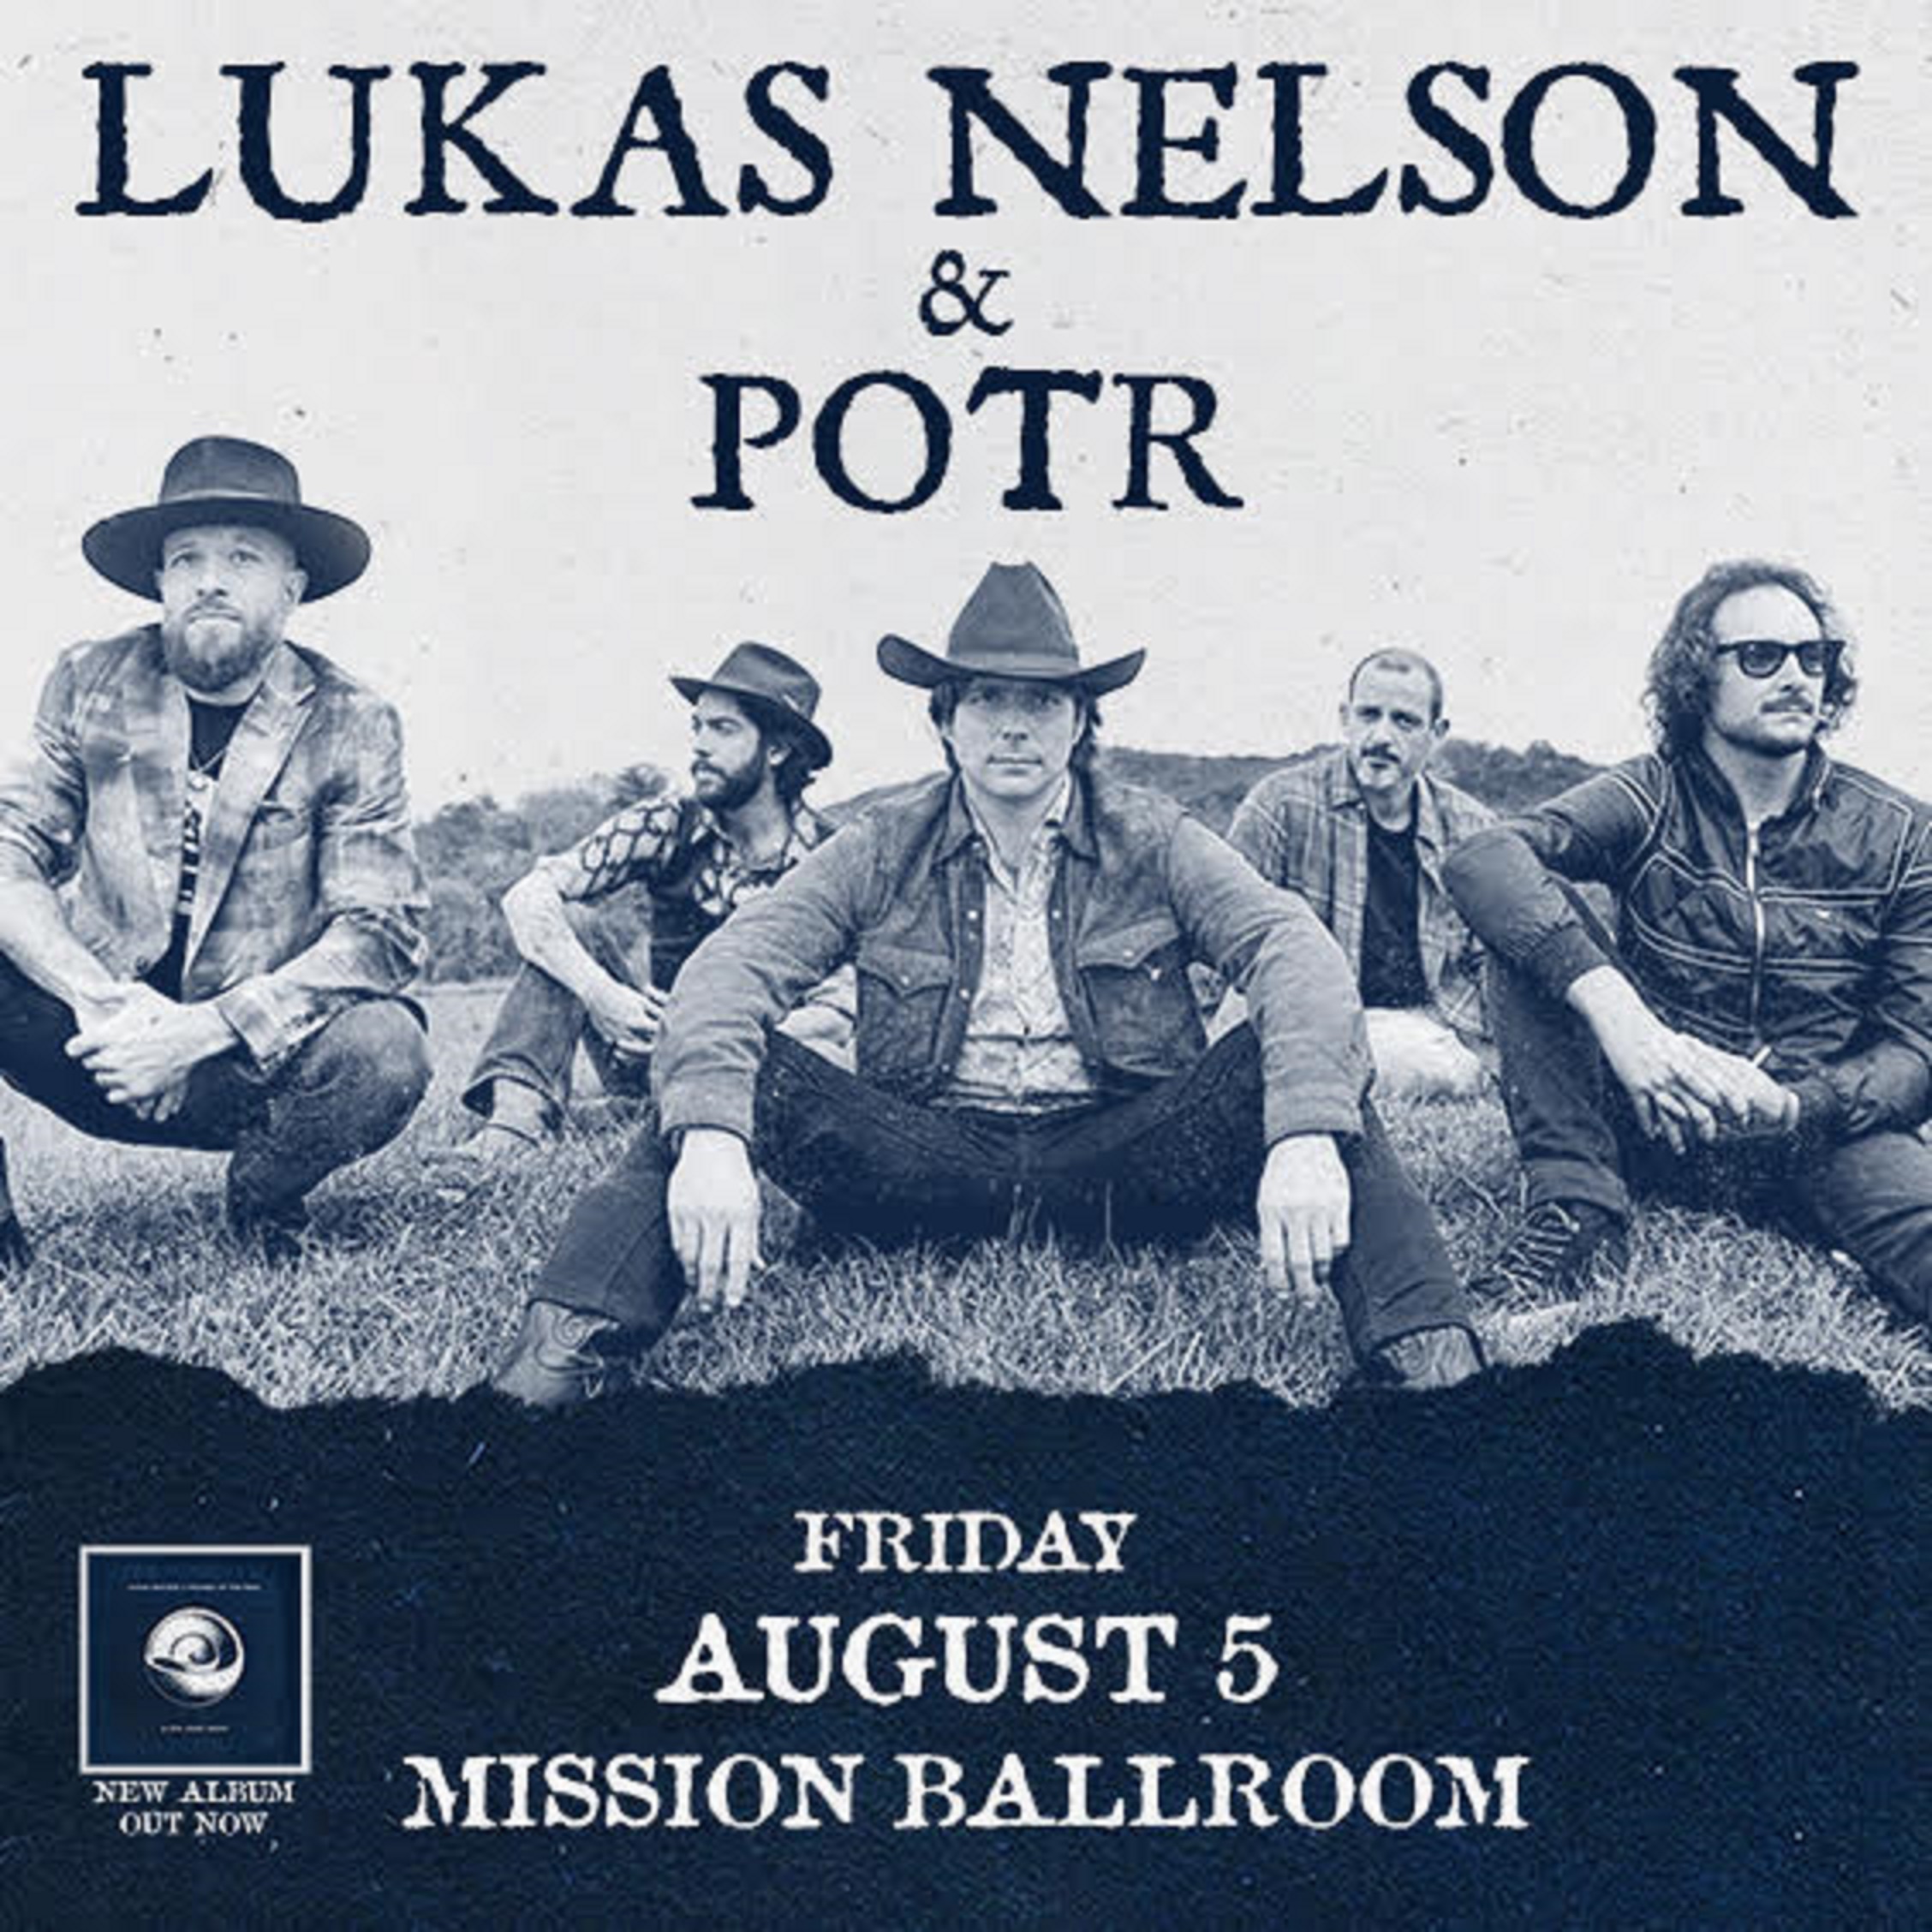 Lukas Nelson & POTR will play Mission Ballroom August 5th